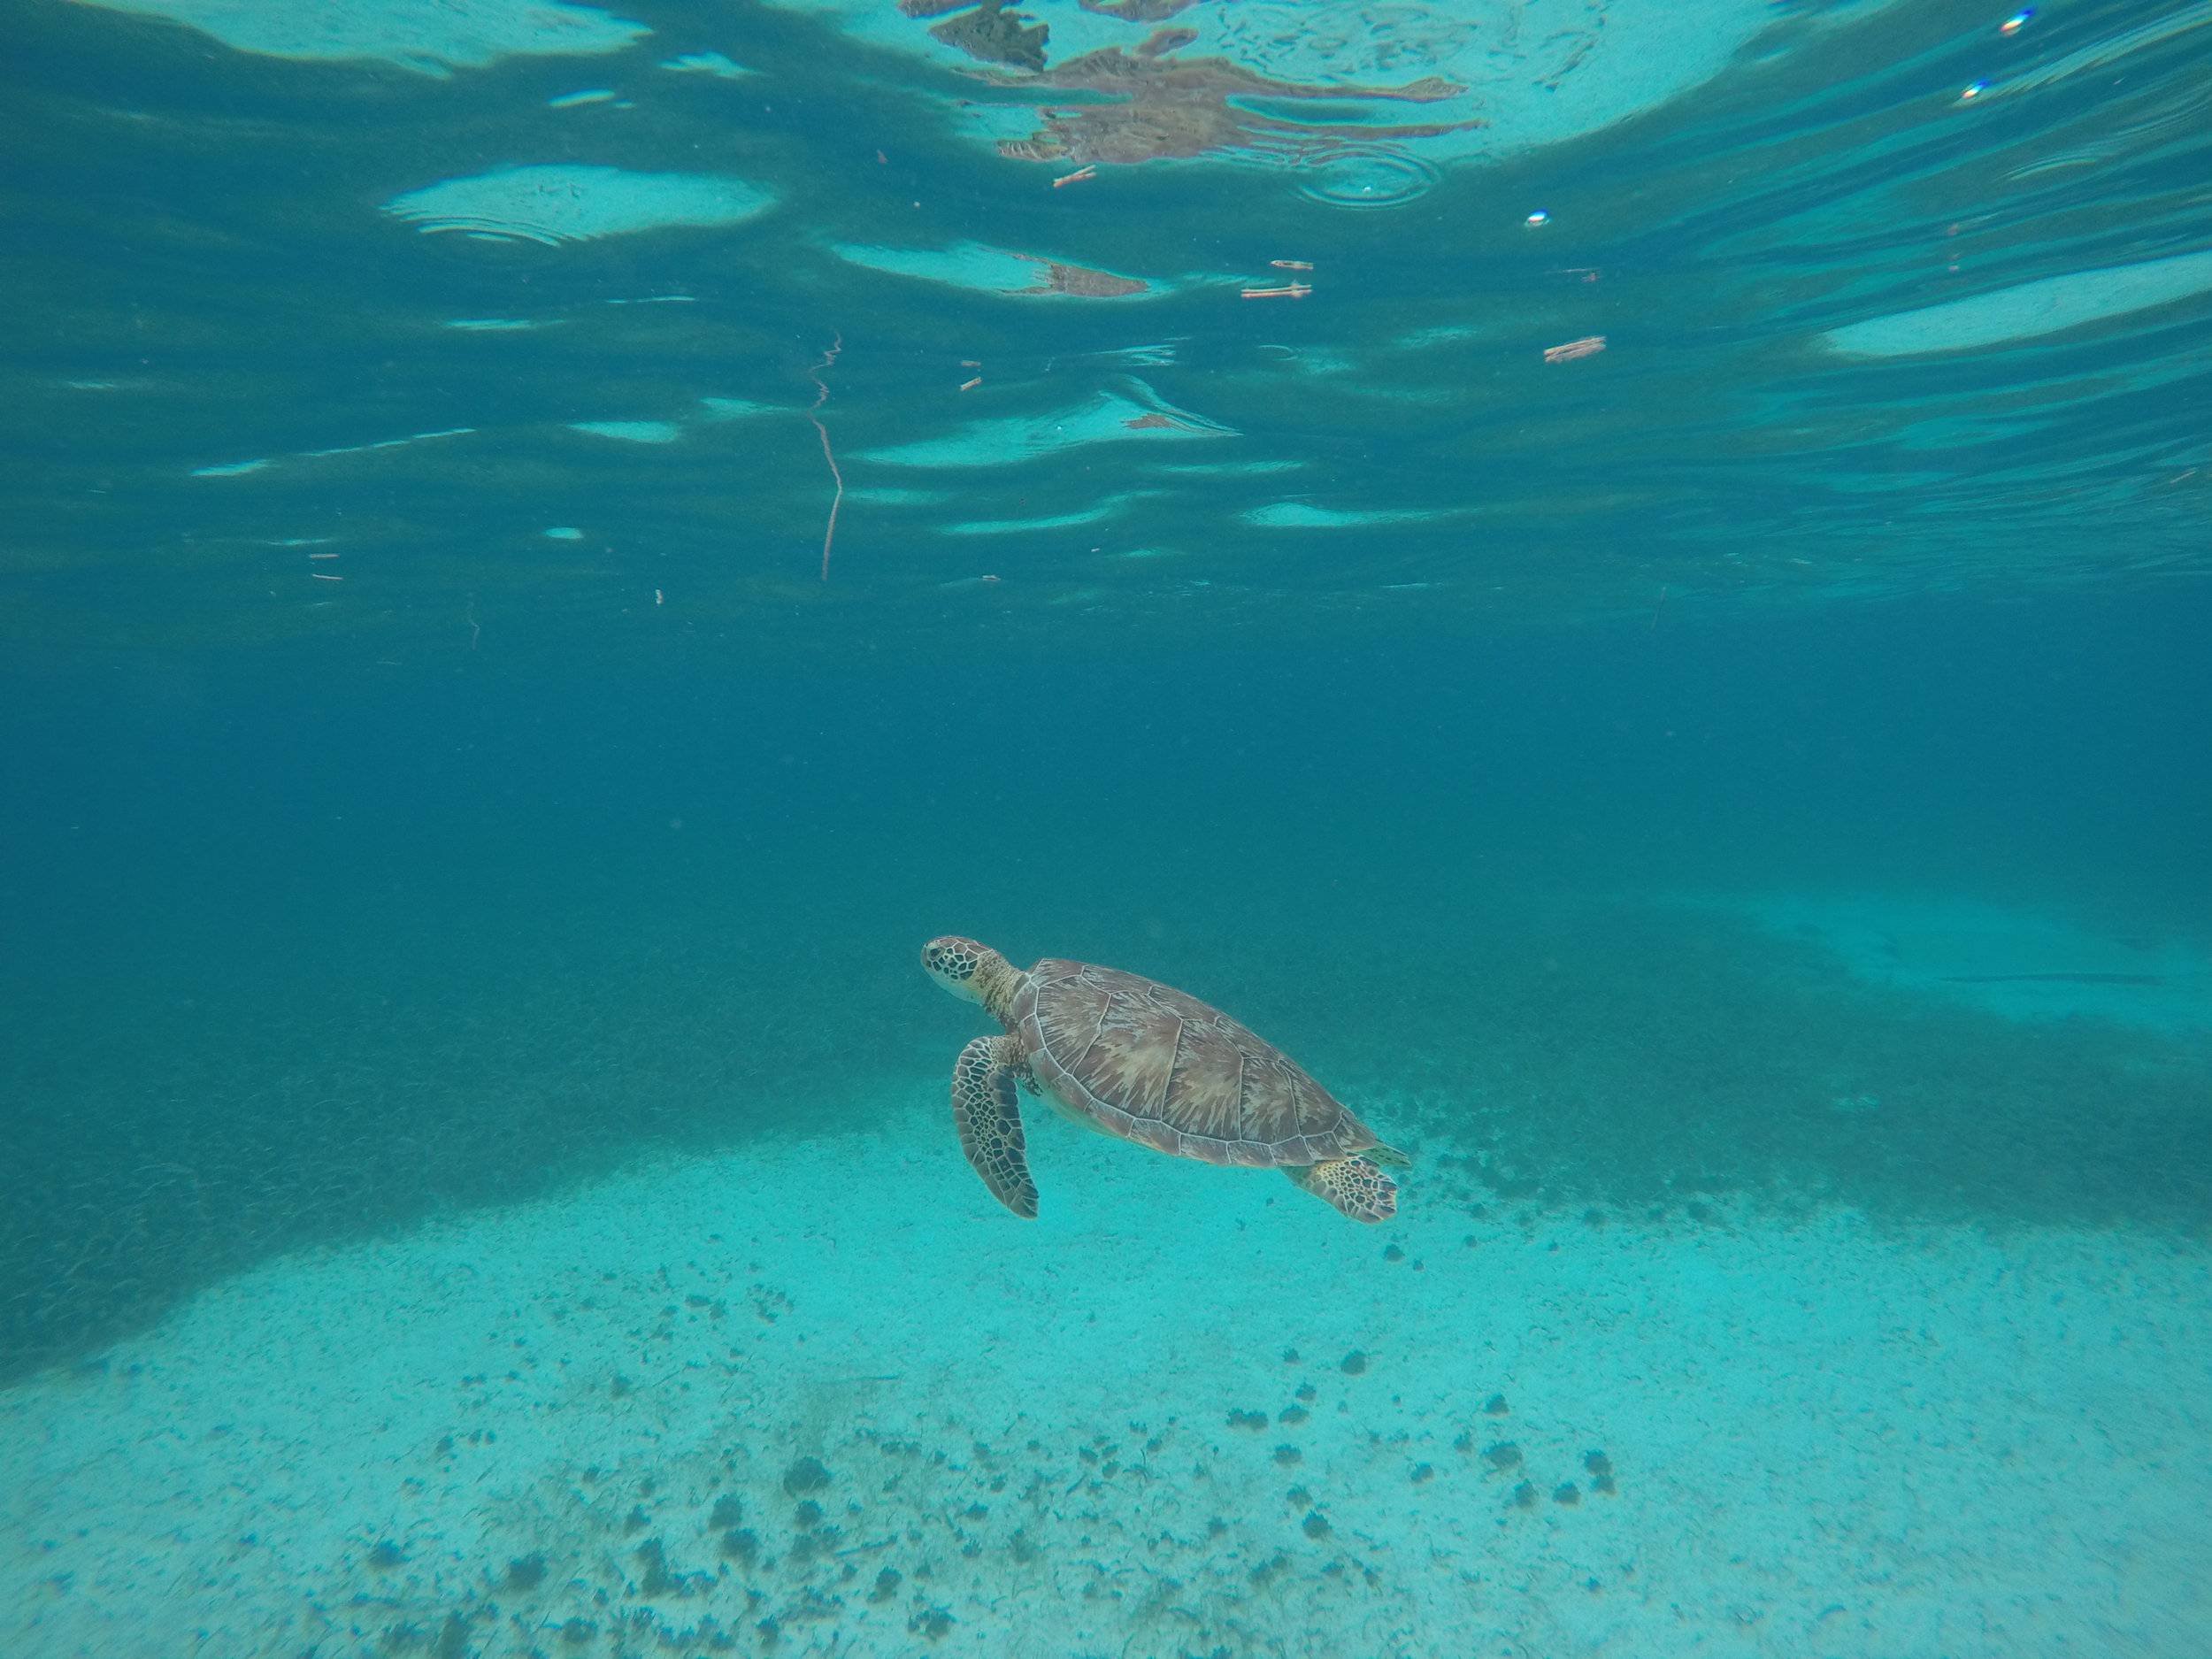 Turtle Research: Snorkel with EcoMar staff to look for turtles. When one is found, the staff will attempt to catch it for study and then release